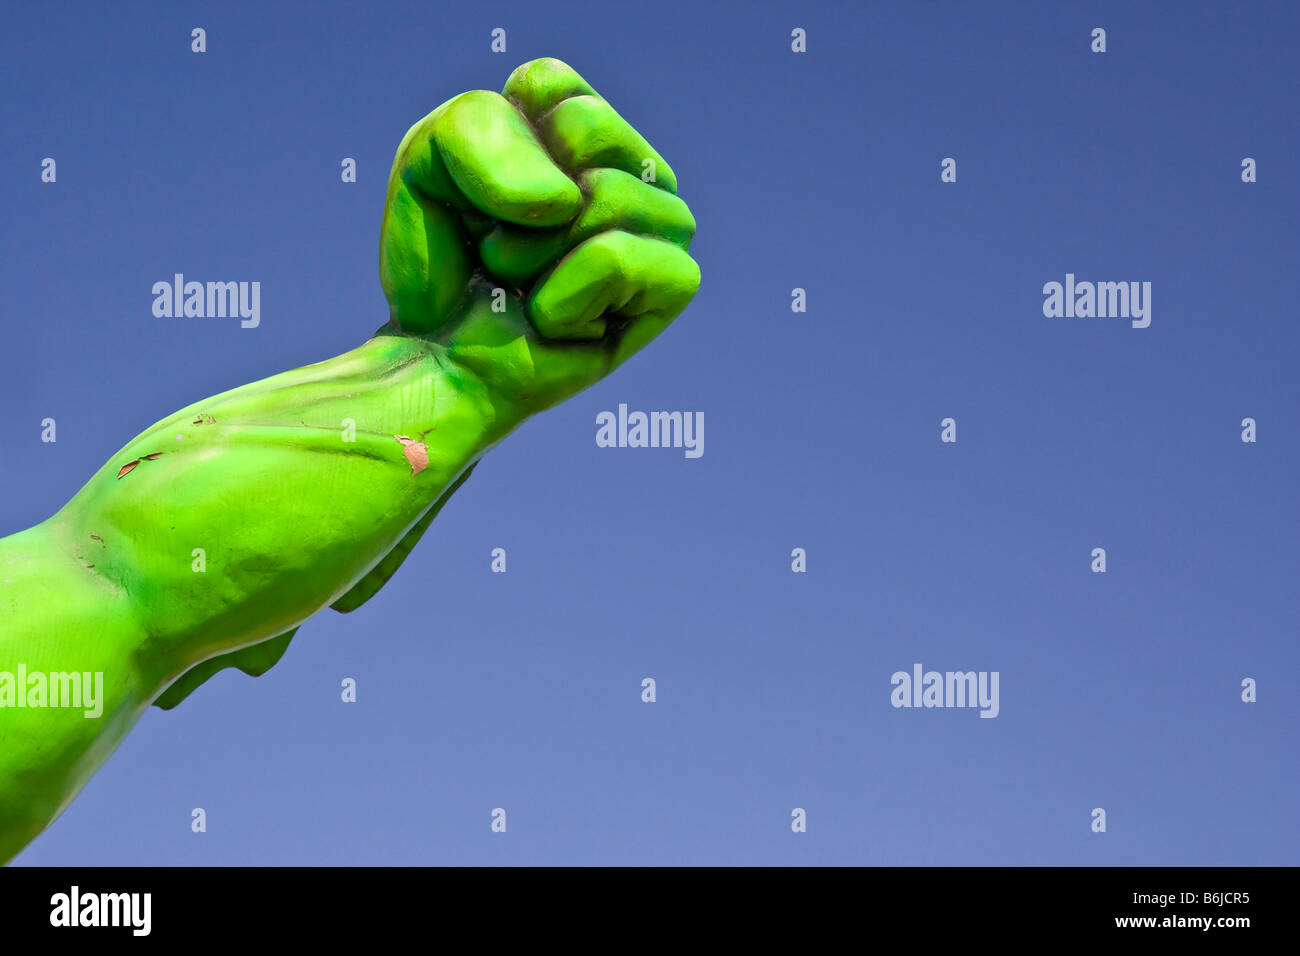 The bright green arm and fist of a giant creature attached to a tourist trap type attraction in Pigeon Forge, Tennessee USA.. Stock Photo